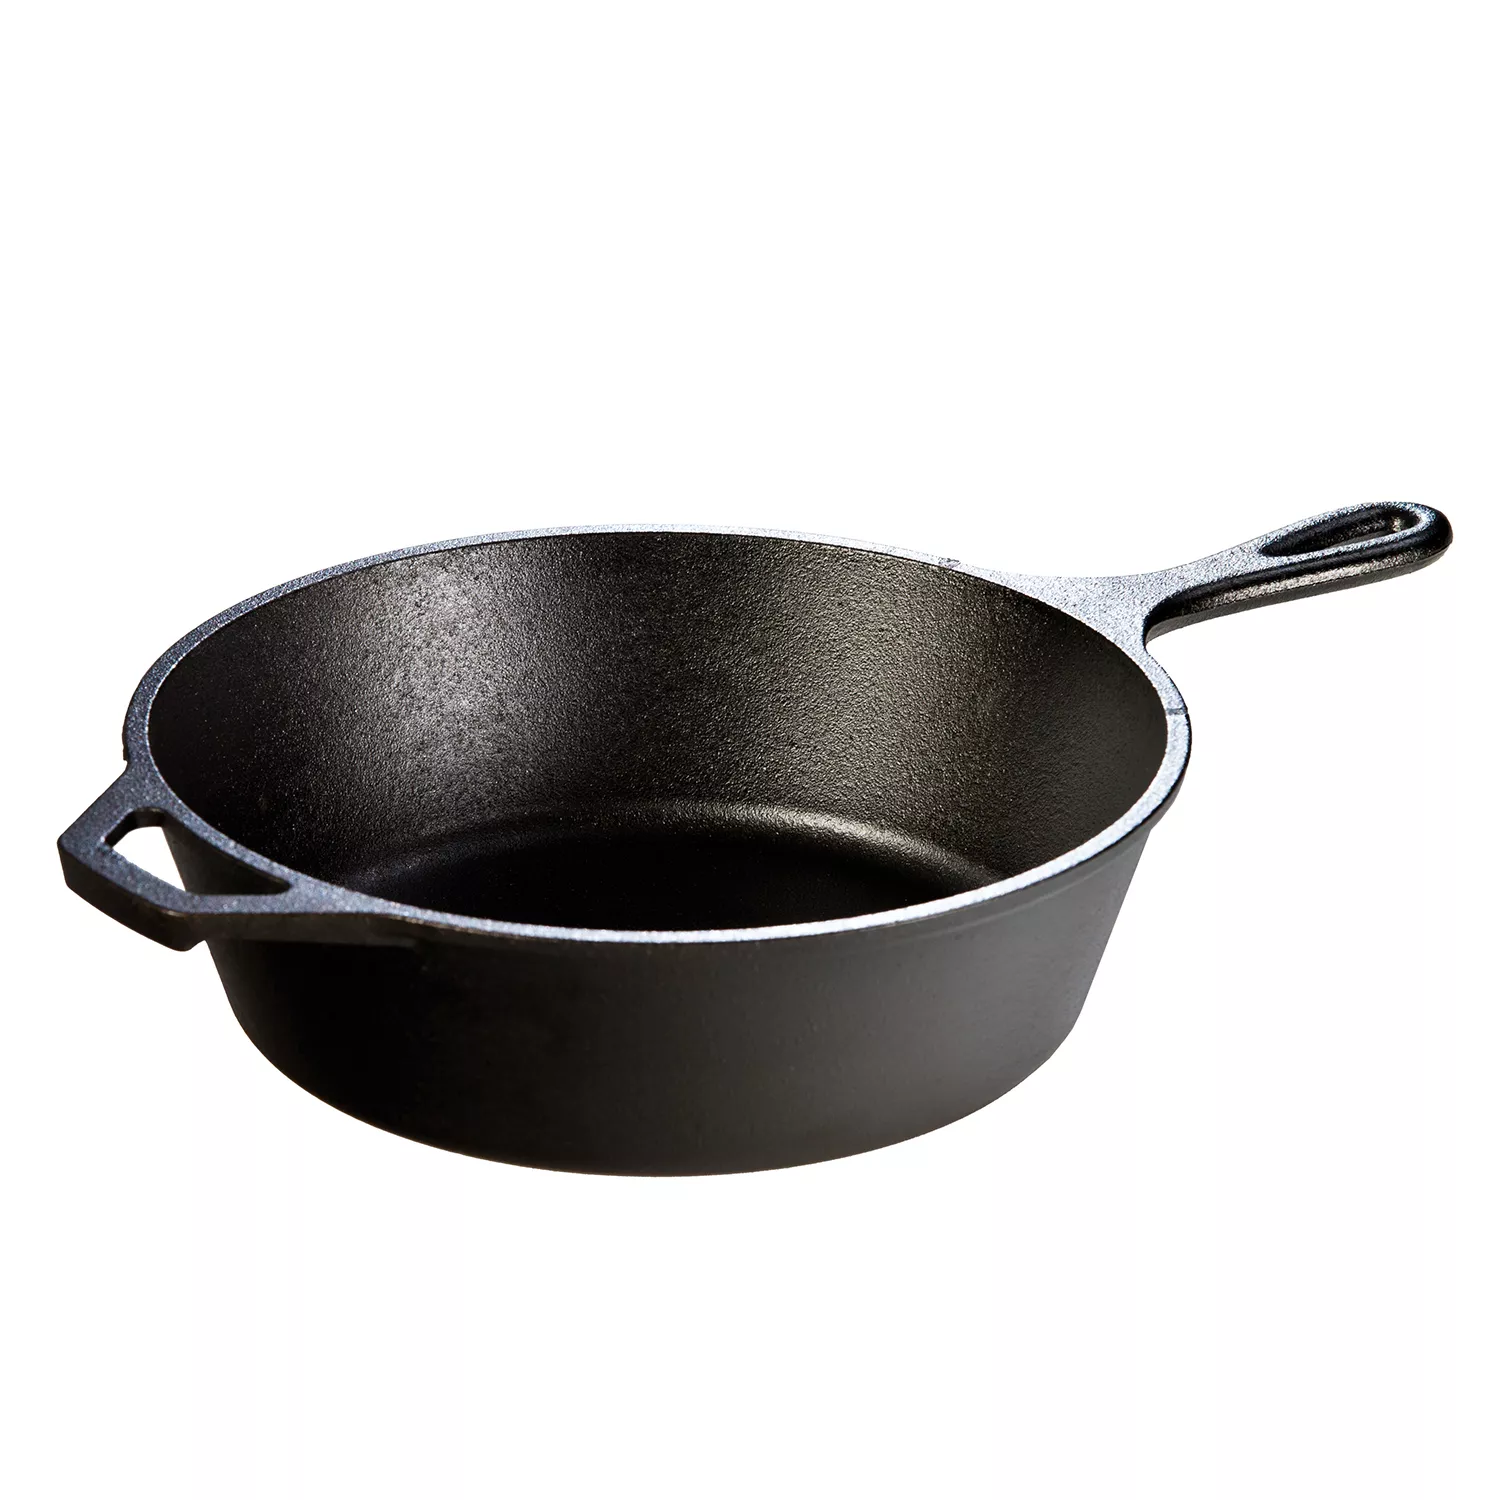 Lodge Lodge 10.25 Round Pre-Seasoned Cast Iron Grill Pan - Whisk